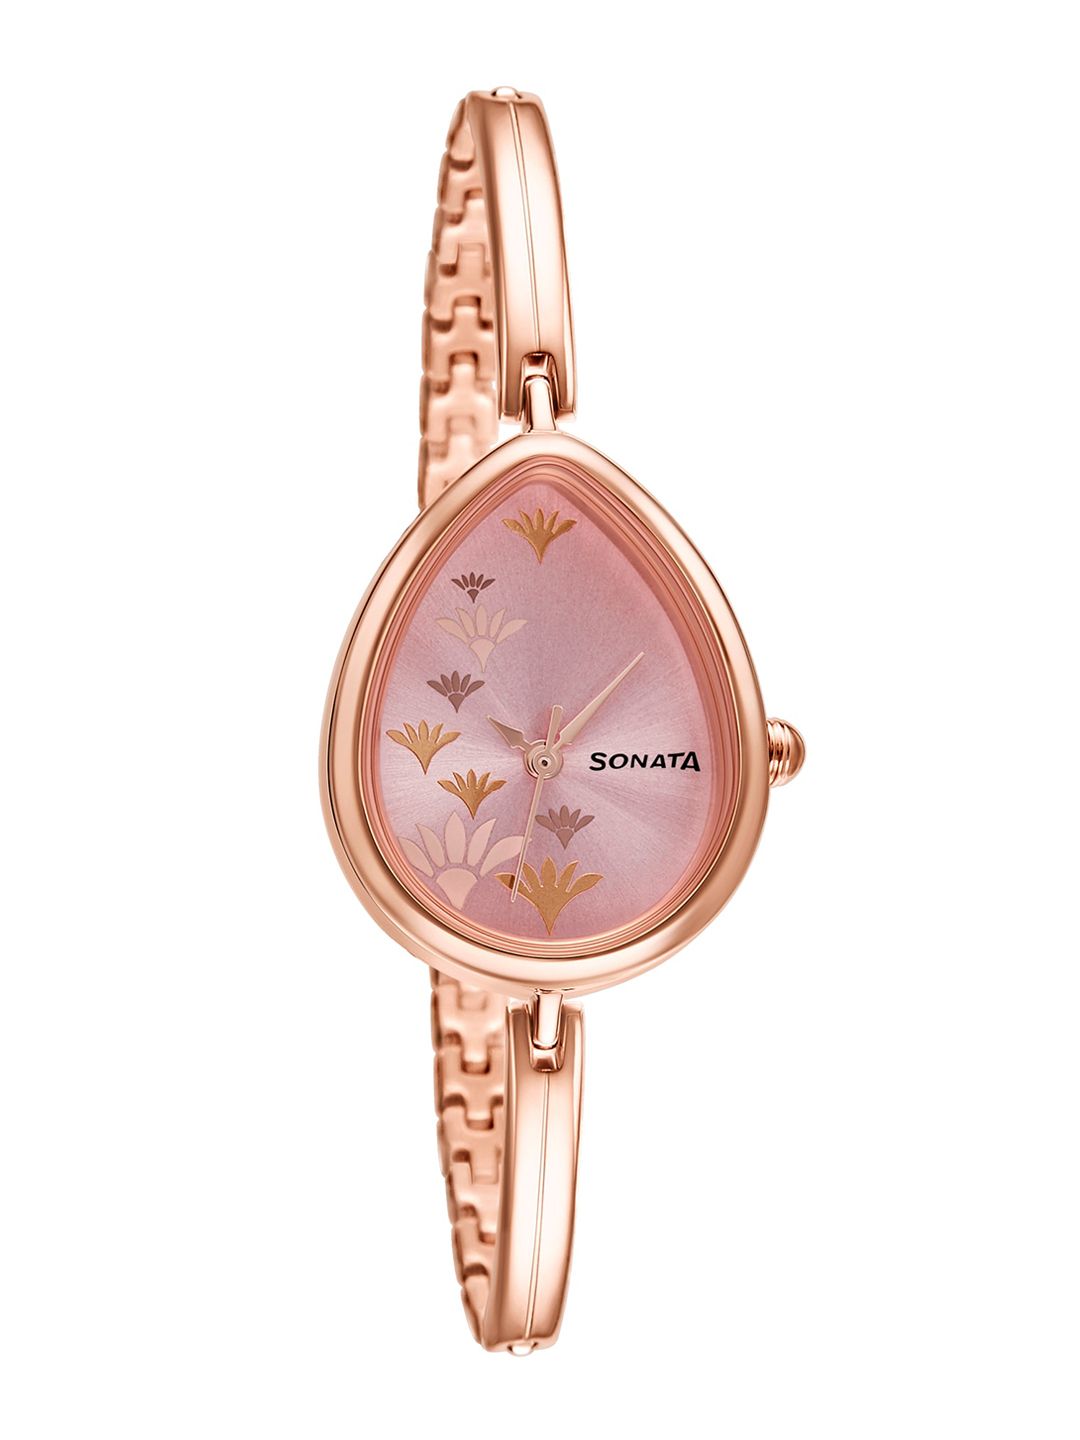 Sonata Women Rose Gold-Toned Analogue Watch 8169WM01 Price in India